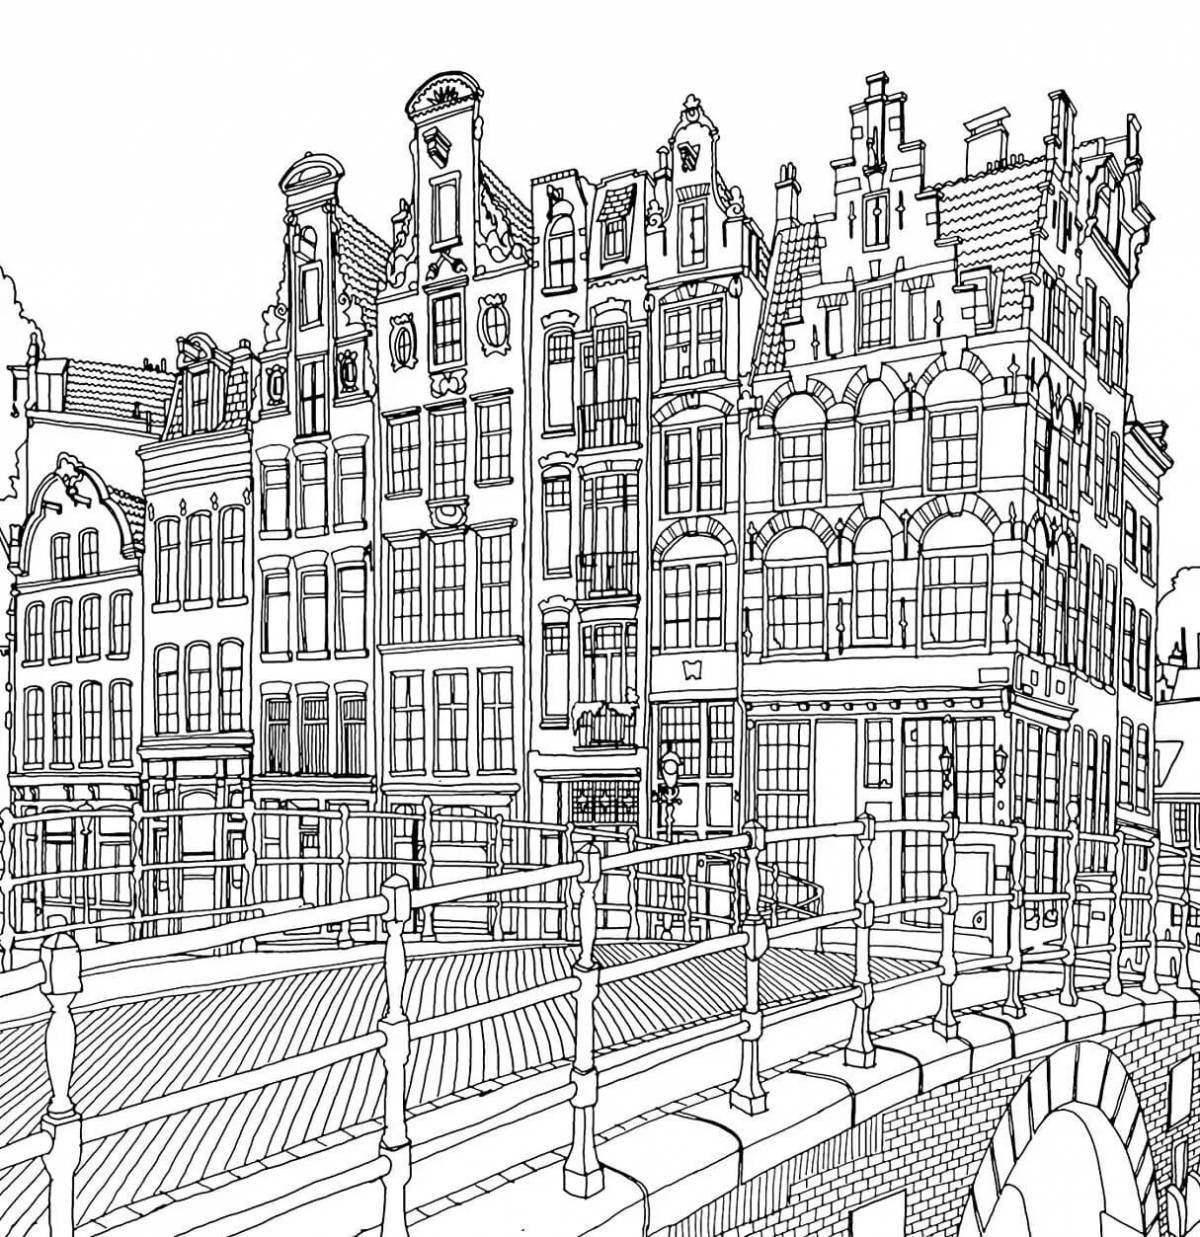 Delightful city coloring book for adults